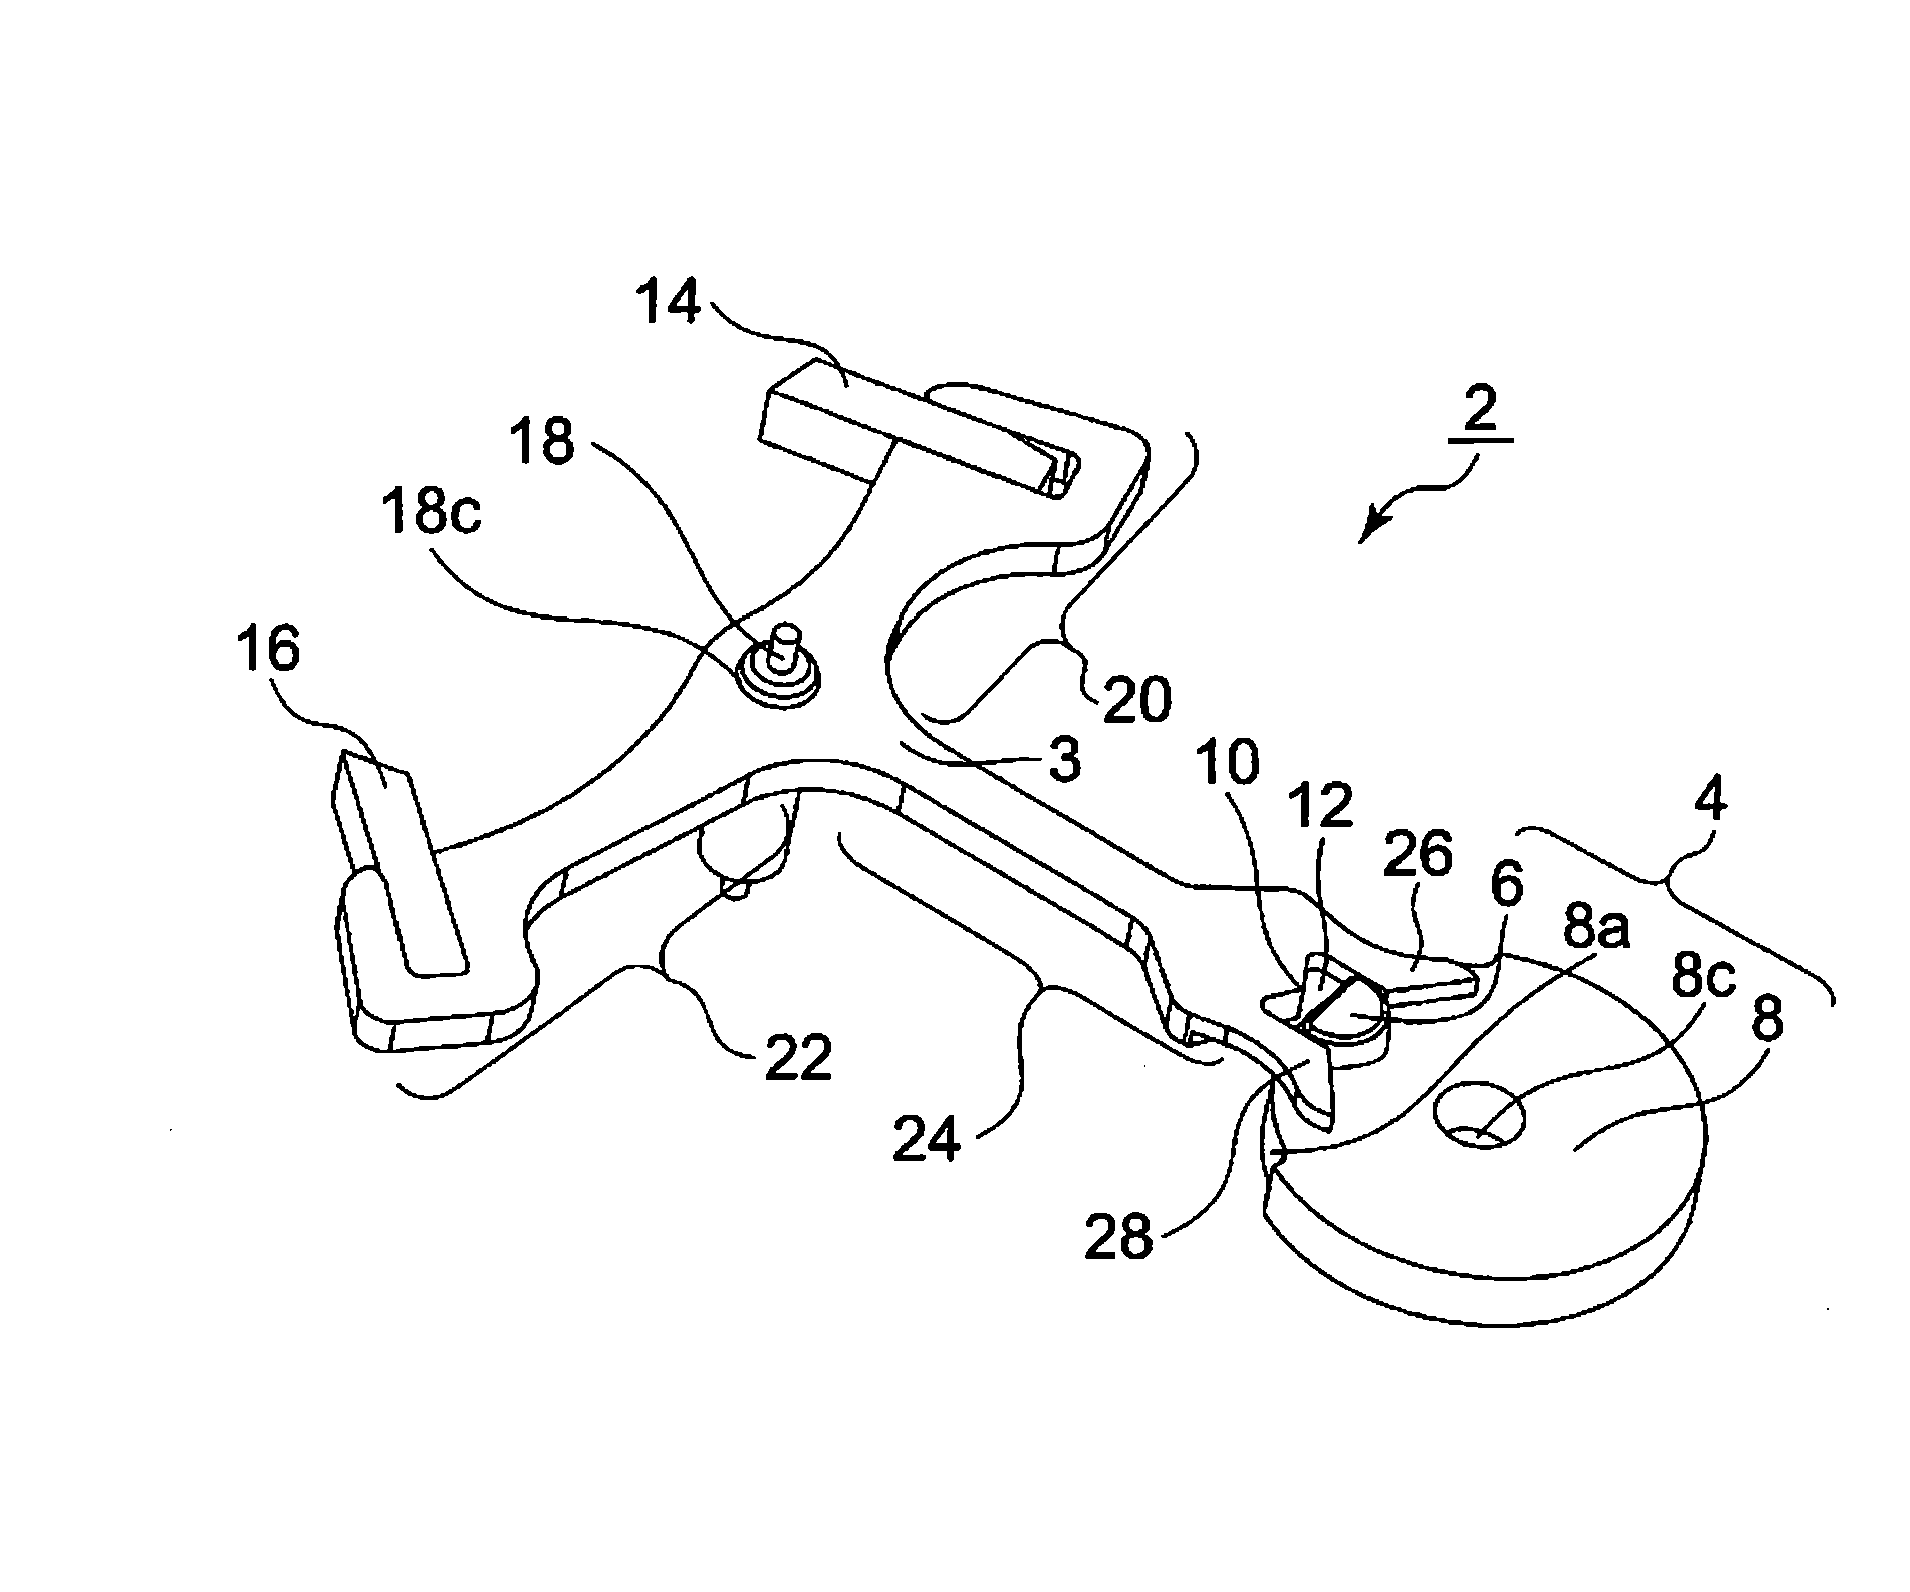 Escapement governor, mechanical watch, pallet fork (incomplete) manufacturing method, and roller manufacturing method